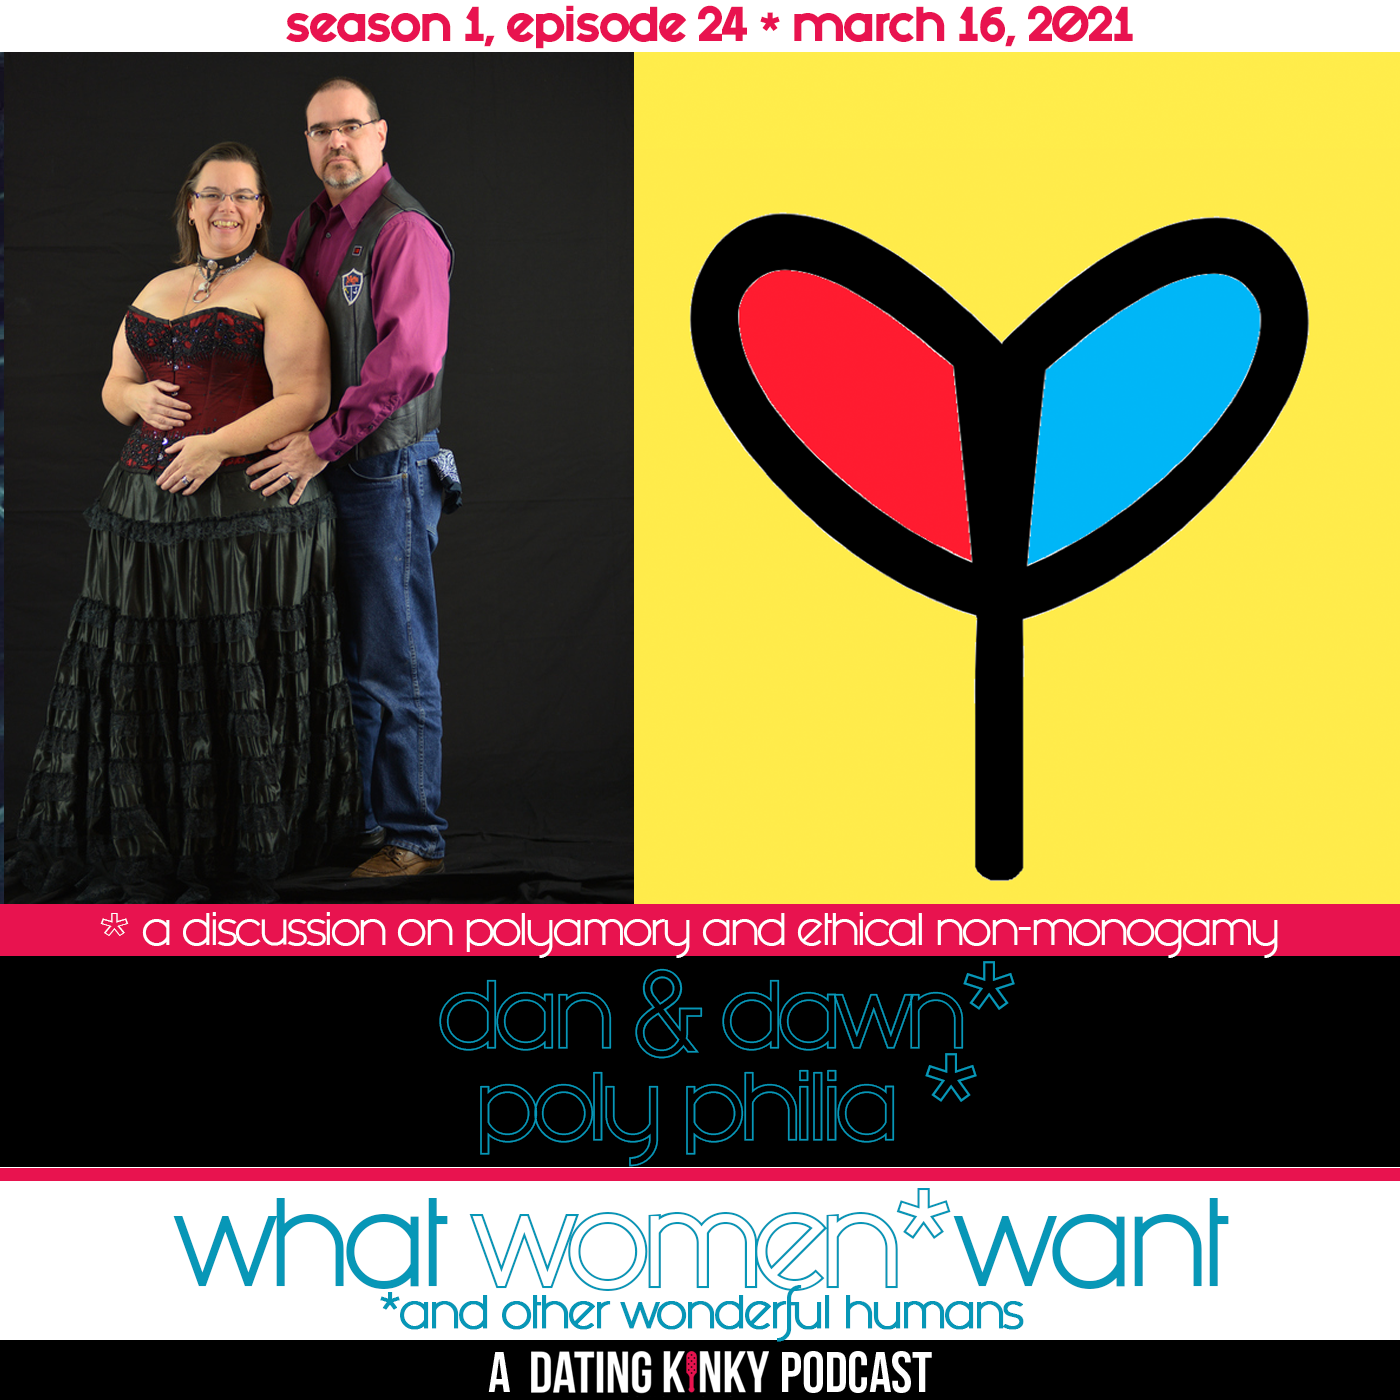 Polyamory and Ethical Non-monogamy with Dan and dawn and Poly Philia